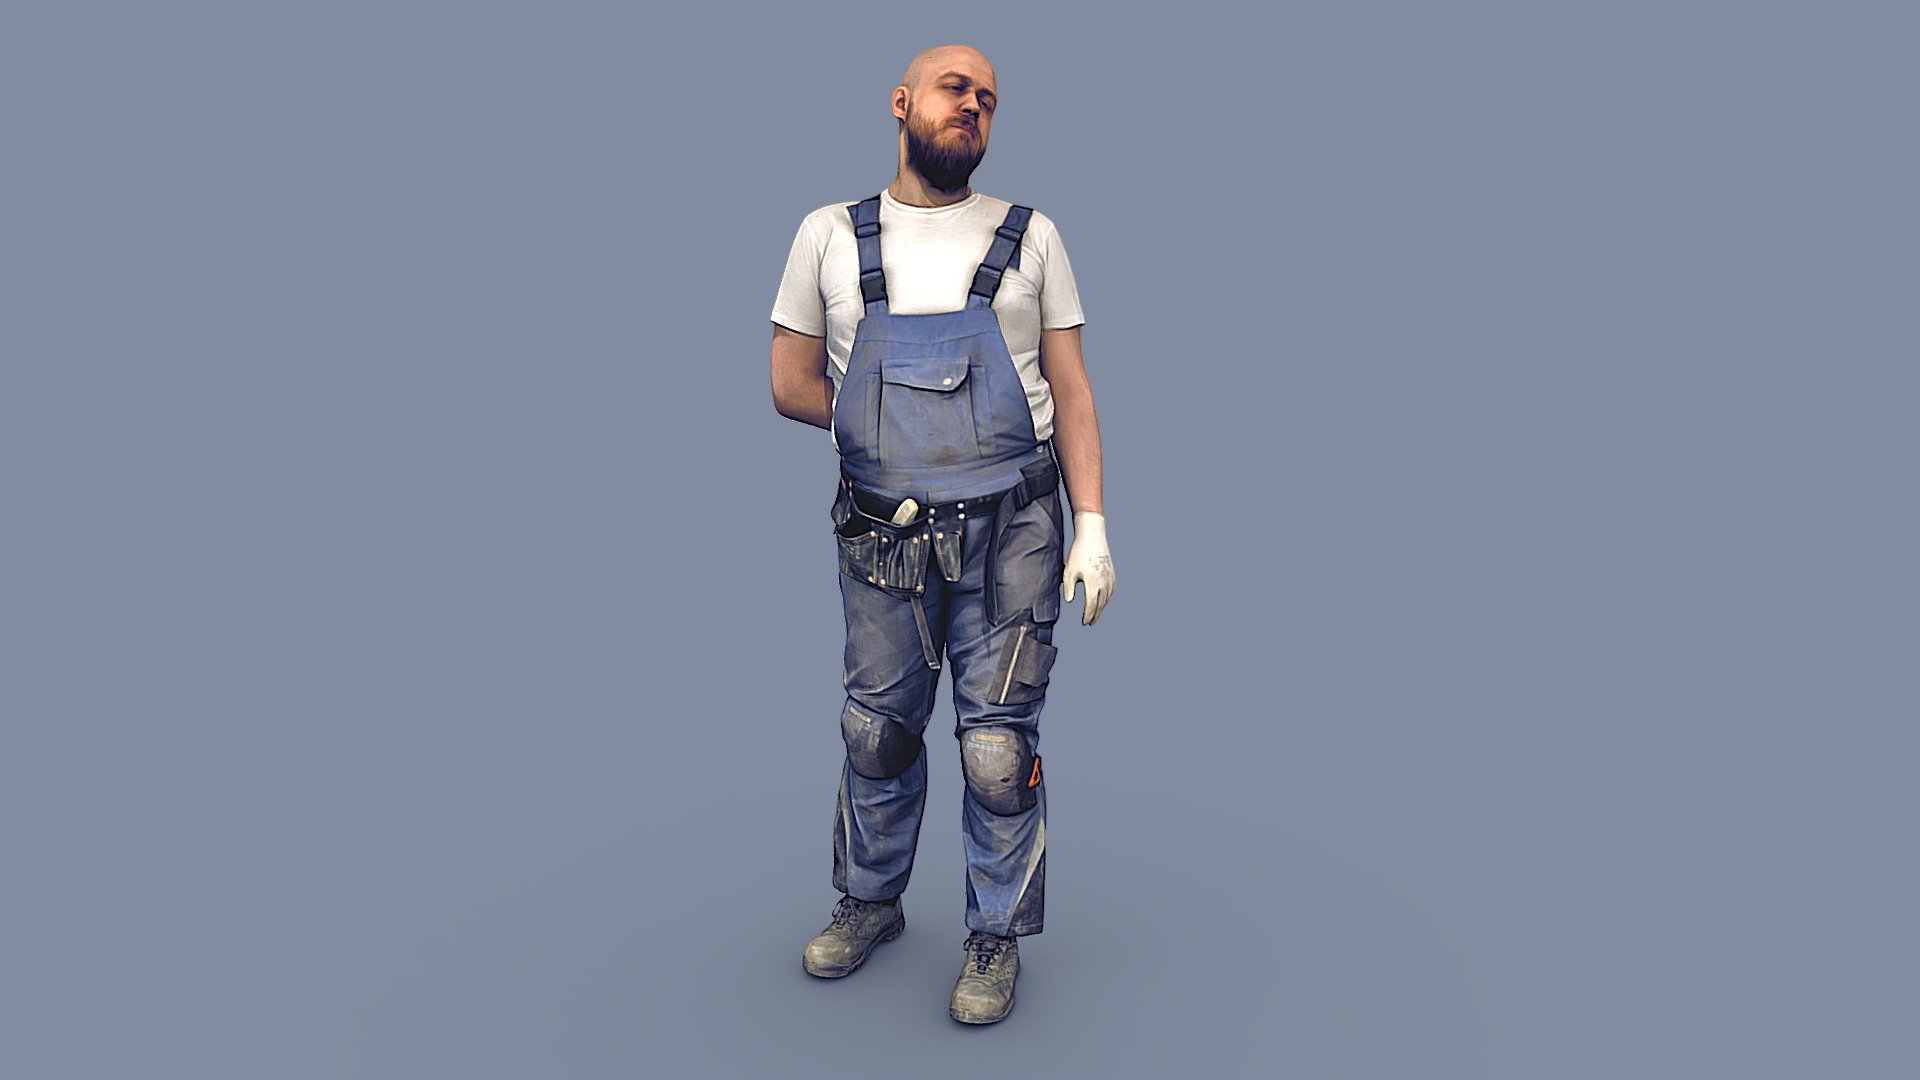 ✉️ A young man, a bald guy with a beard, a builder, a worker, in a working uniform, overalls, with a belt bag tools, in knee protection, stands, resting a little bending in his back.

🦾 This model will be an excellent mid-range participant. It does not need to be very close and try to see the details, it reveals and demonstrates its texture as much as possible in case of a certain distance from the foreground.

⚙️ Photorealistic Construction Worker Character 3d model ready for Virtual Reality (VR), Augmented Reality (AR), games and other real-time apps. 
Suitable for the architectural visualization and another graphical projects. 
50 000 polygons per model 3d model